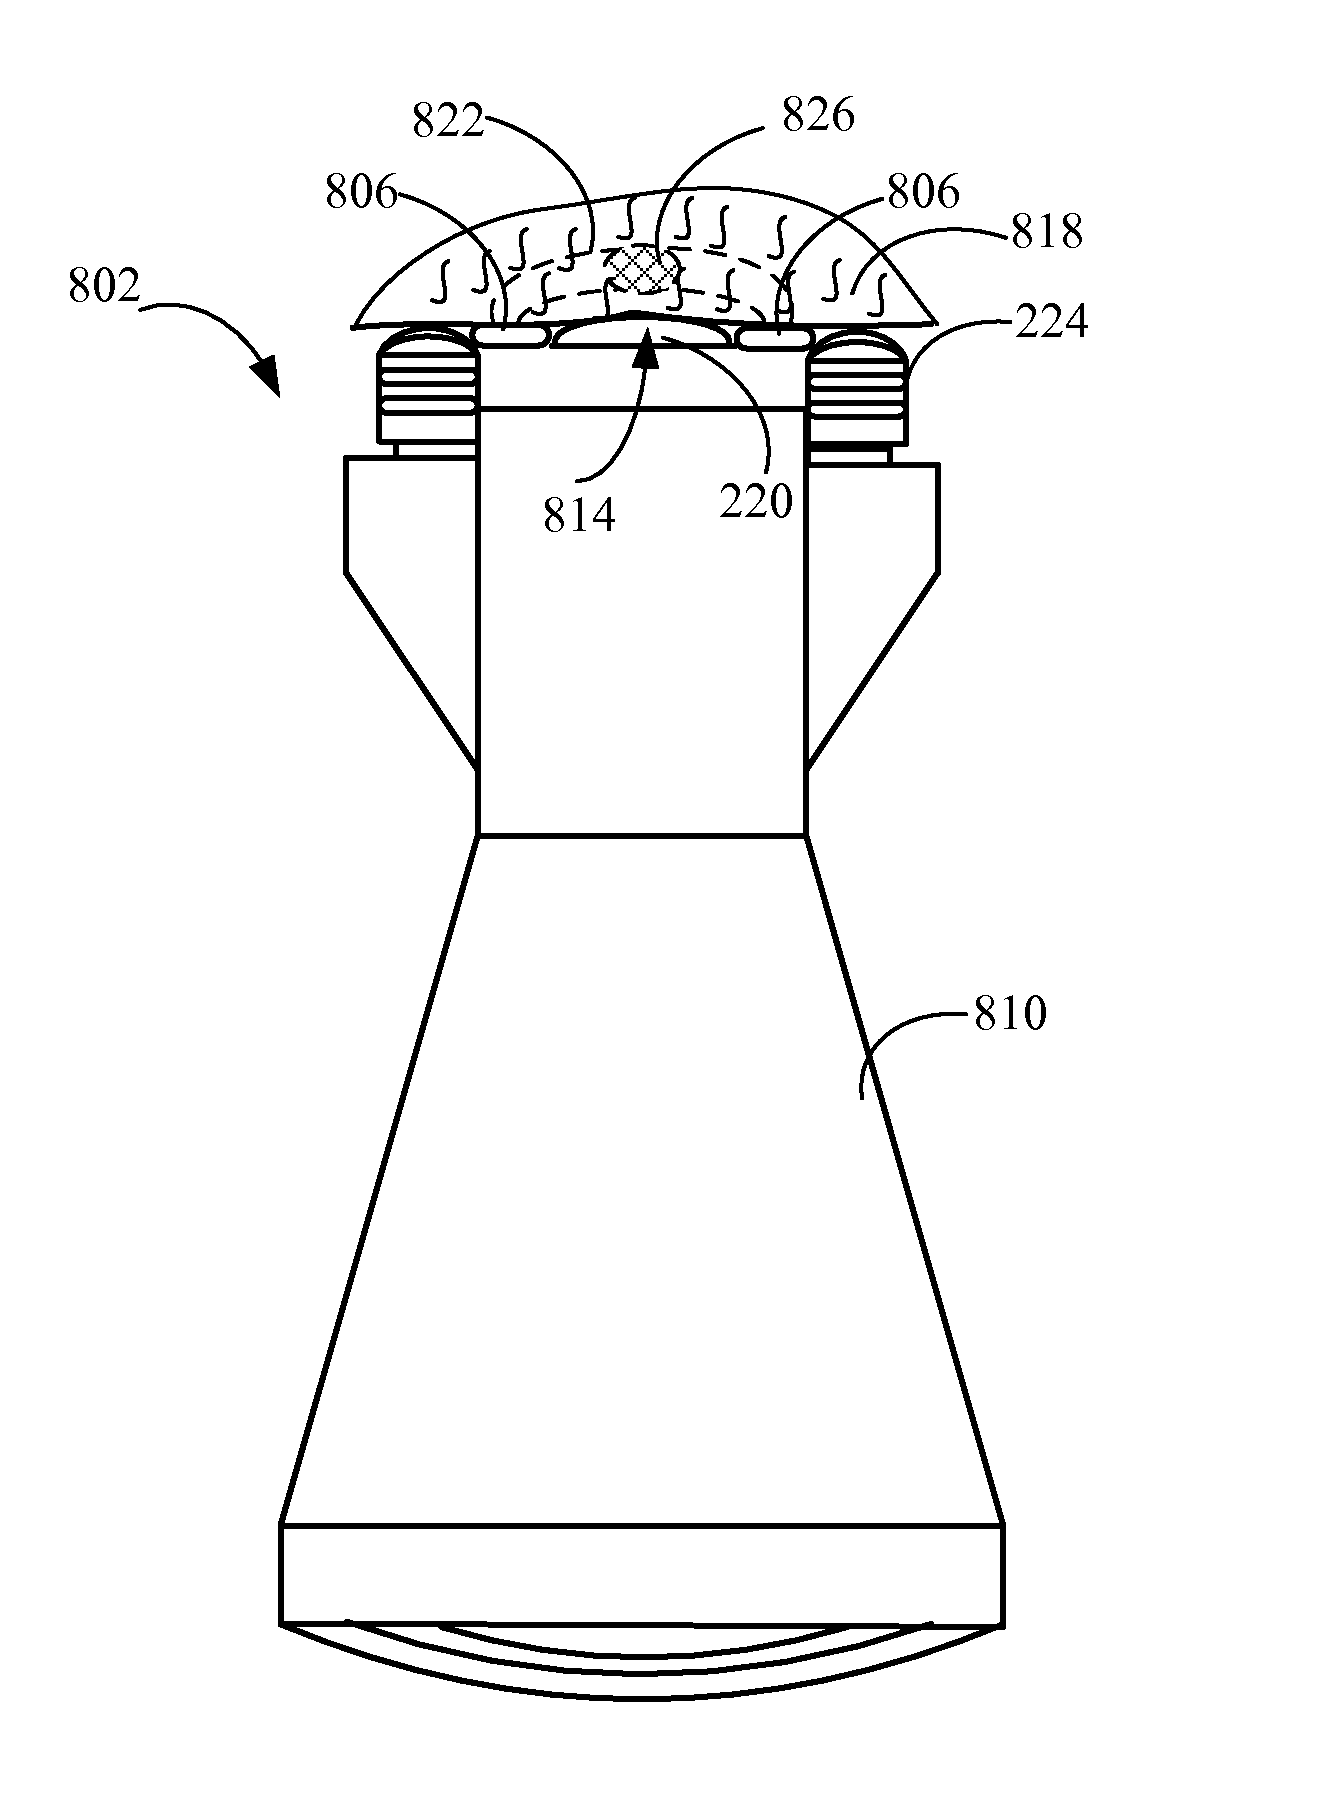 Hair removal apparatus for personal use and the method of using same